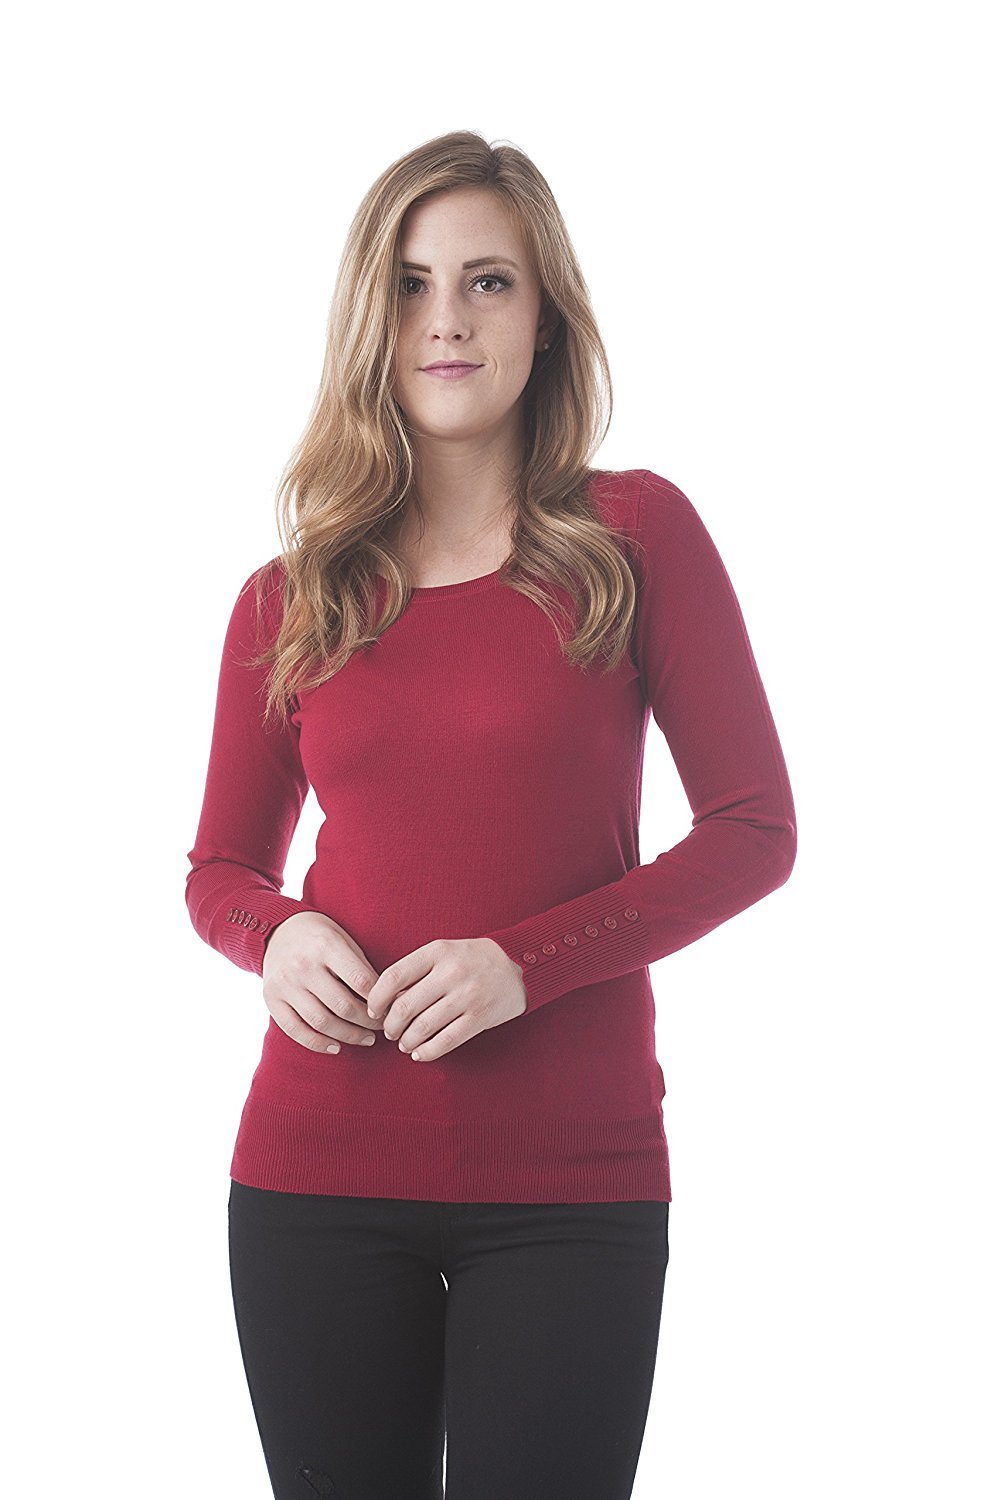 Khanomak Long Sleeve Crewneck Knit Sweater Top With Button On The Sleeves